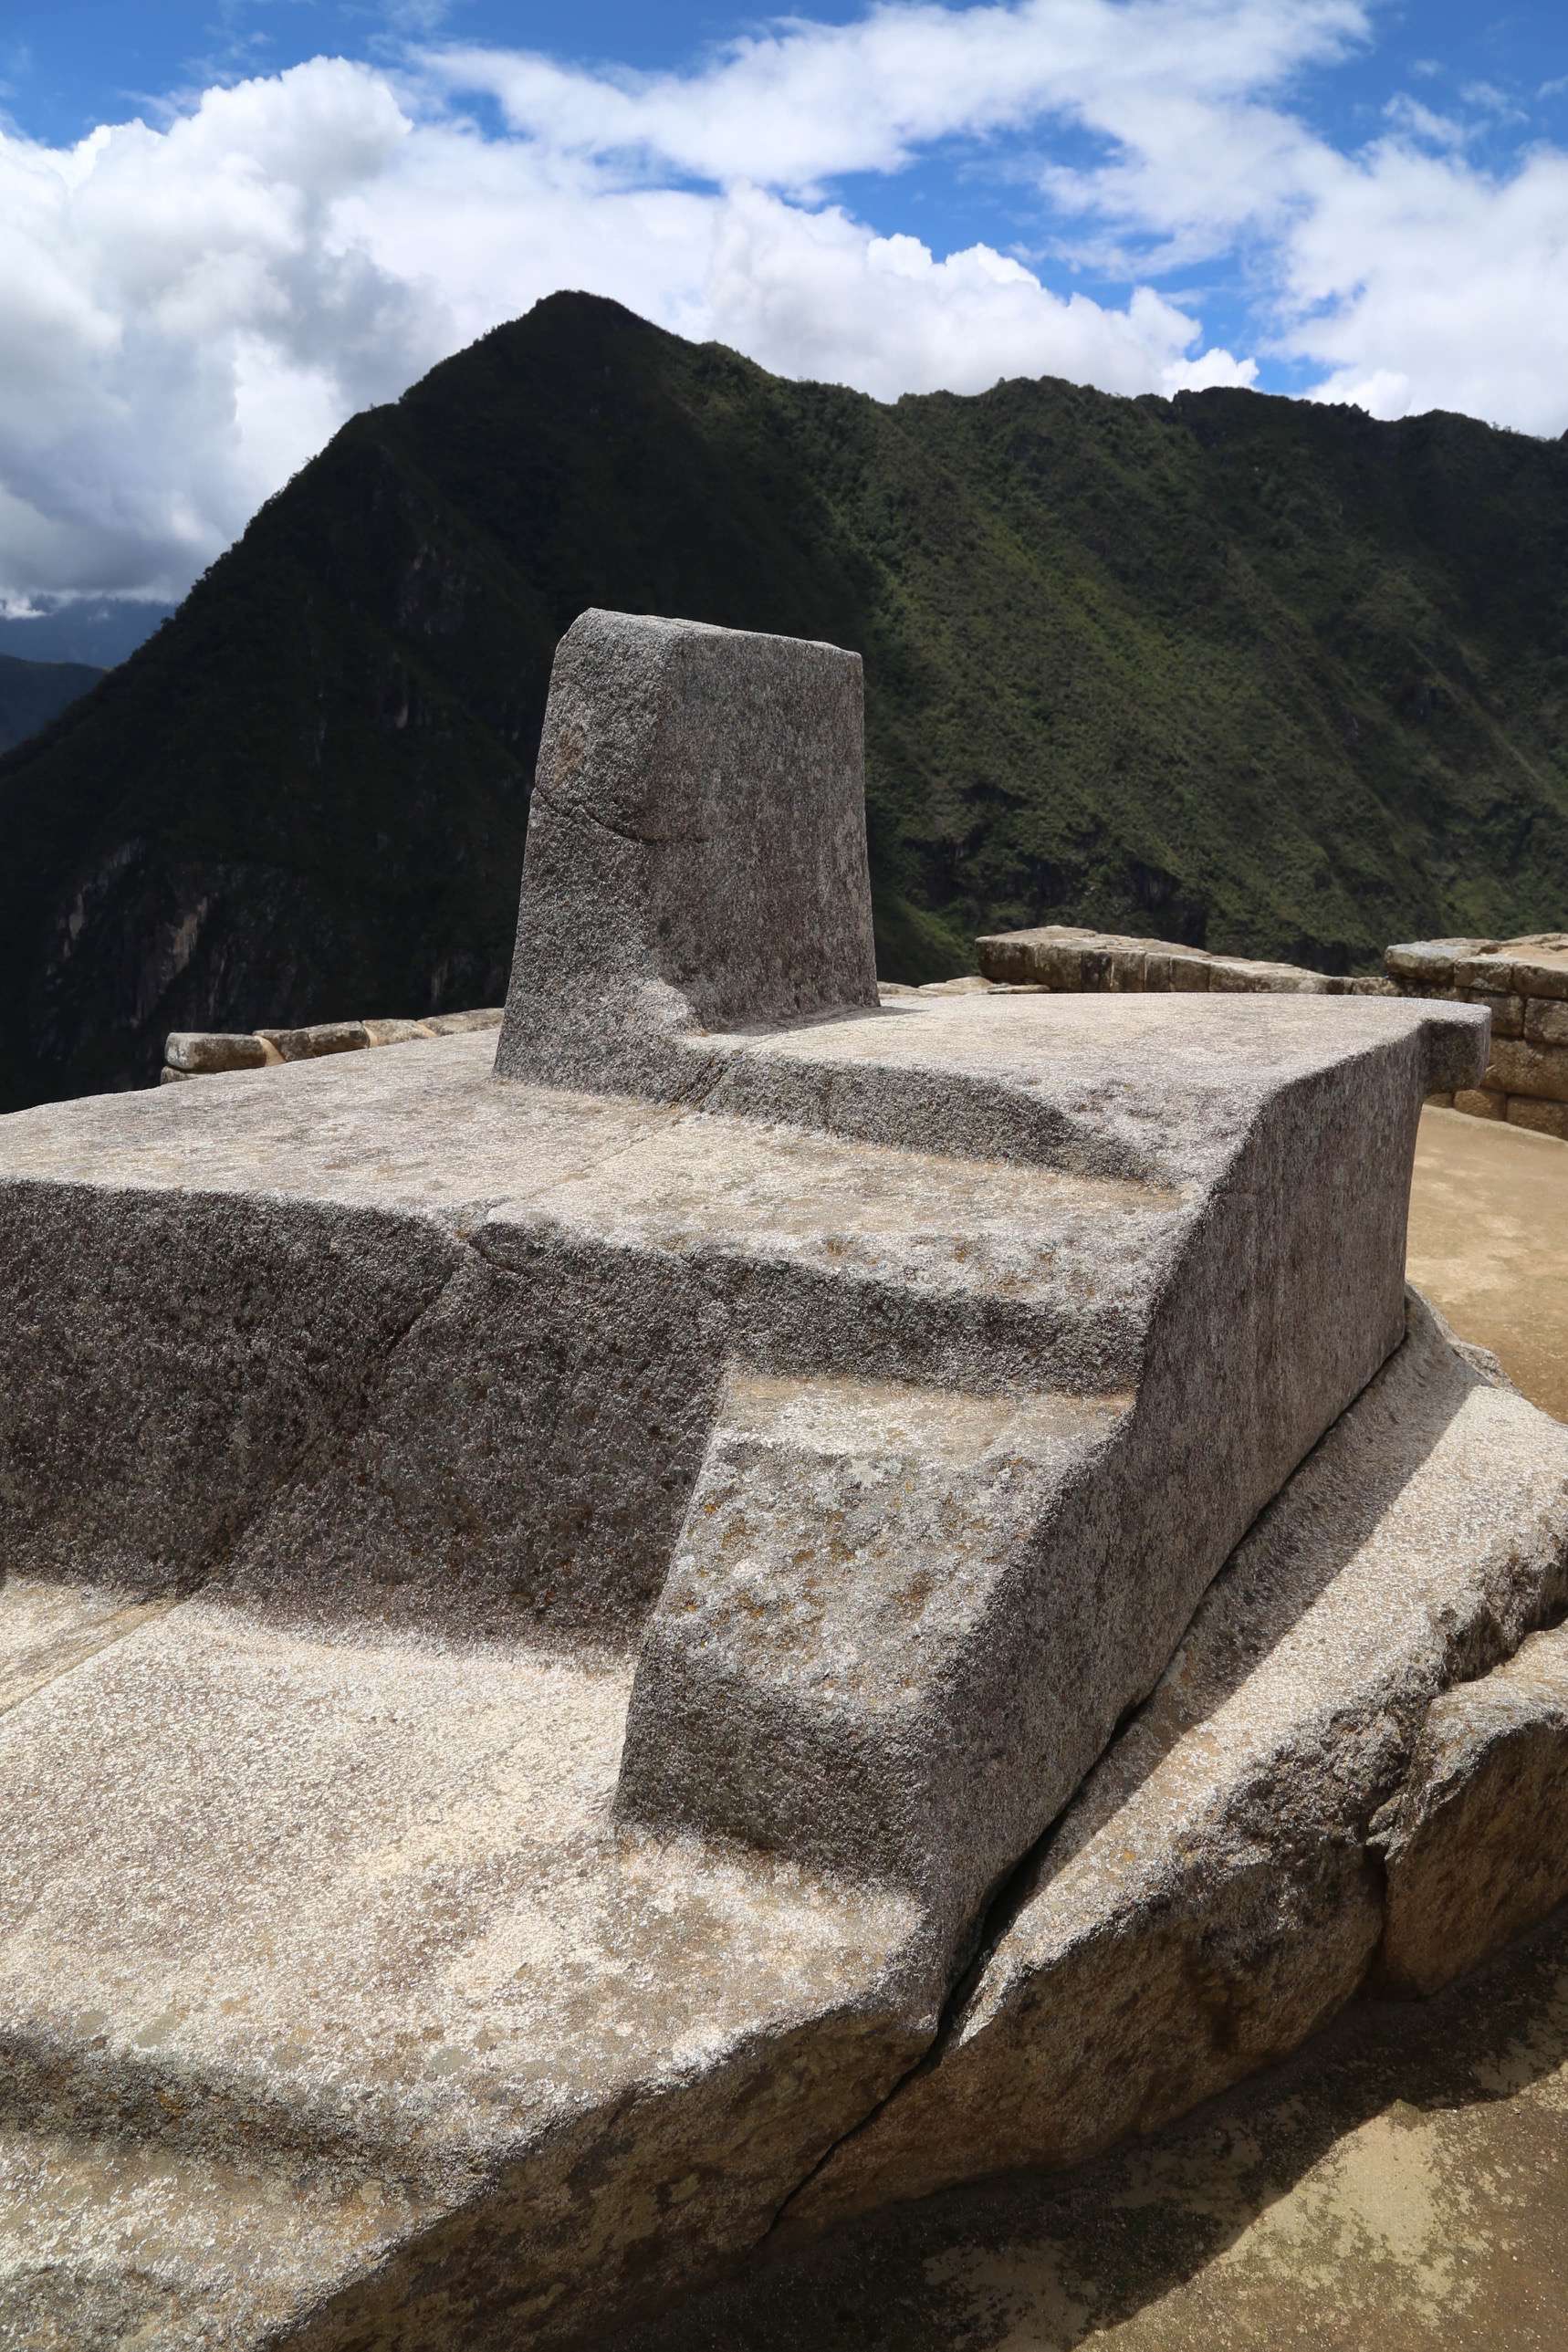 This may be the most significant stone at Machu Picchu. Known as the Intihuatana, its name is Quechua for “the tether of the sun.” The term refers to the theory the stone was once used as an astronomical calendar. During spring and fall equinoxes, the stone casts virtually no shadow.